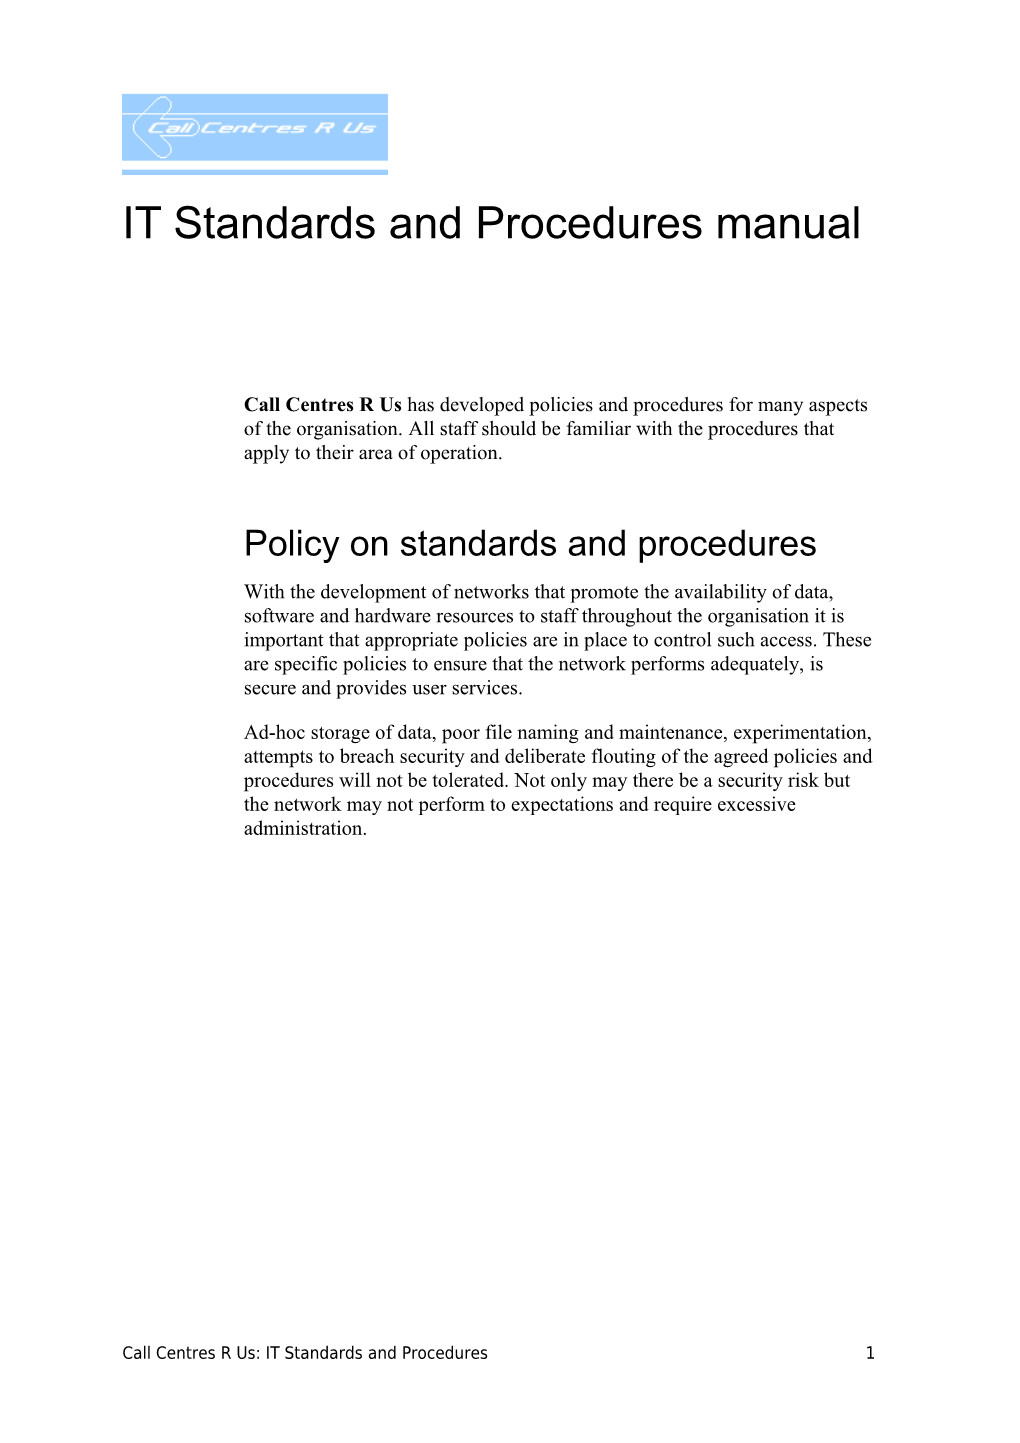 Call Centres R Us - IT Standards and Procedures Manual